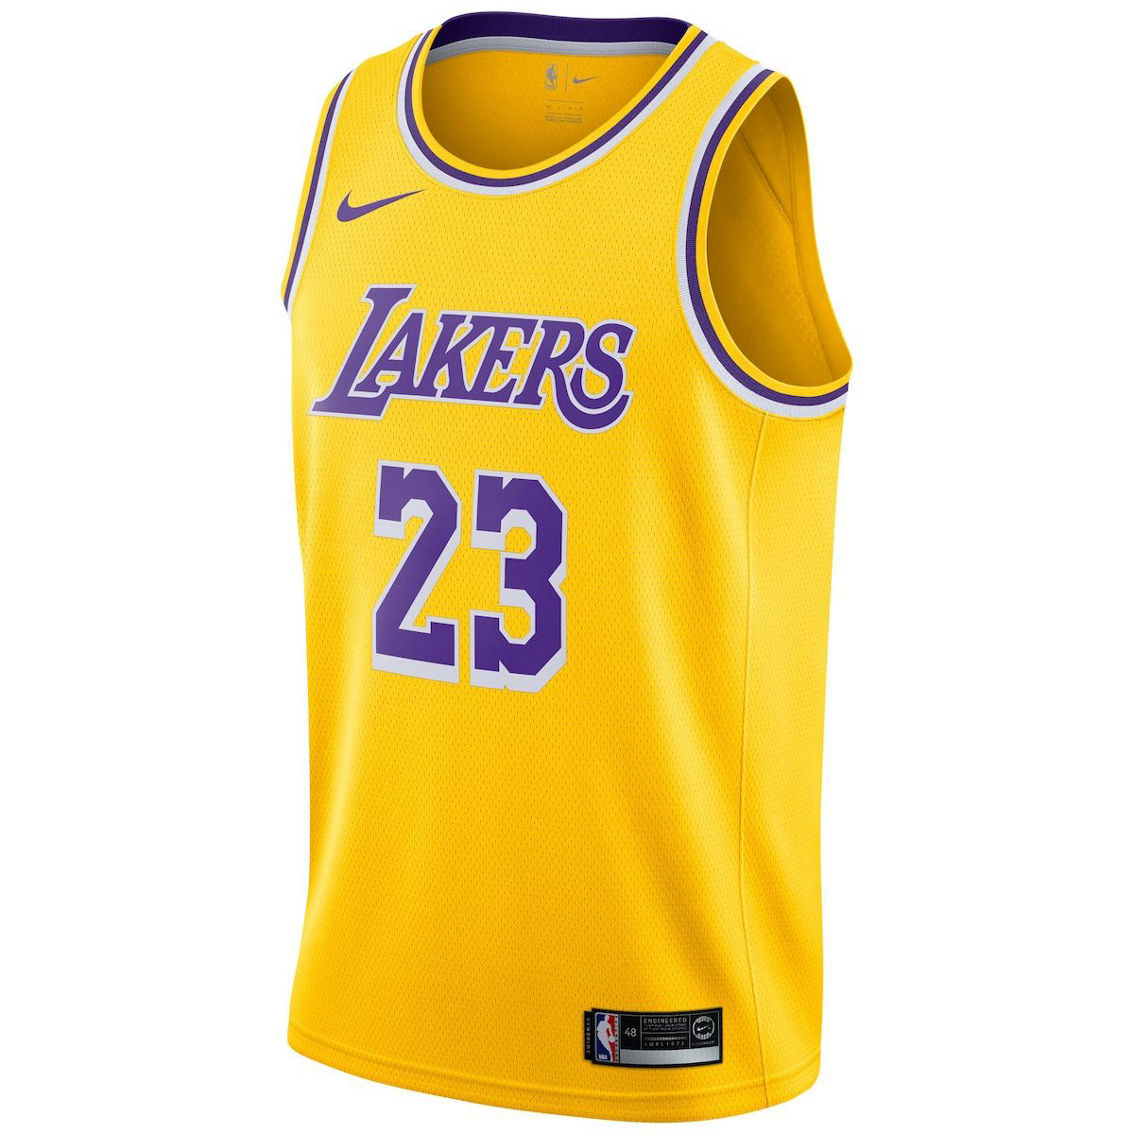 Nike Men's LeBron James Gold Los Angeles Lakers Swingman Player Jersey - Icon Edition - Image 3 of 4